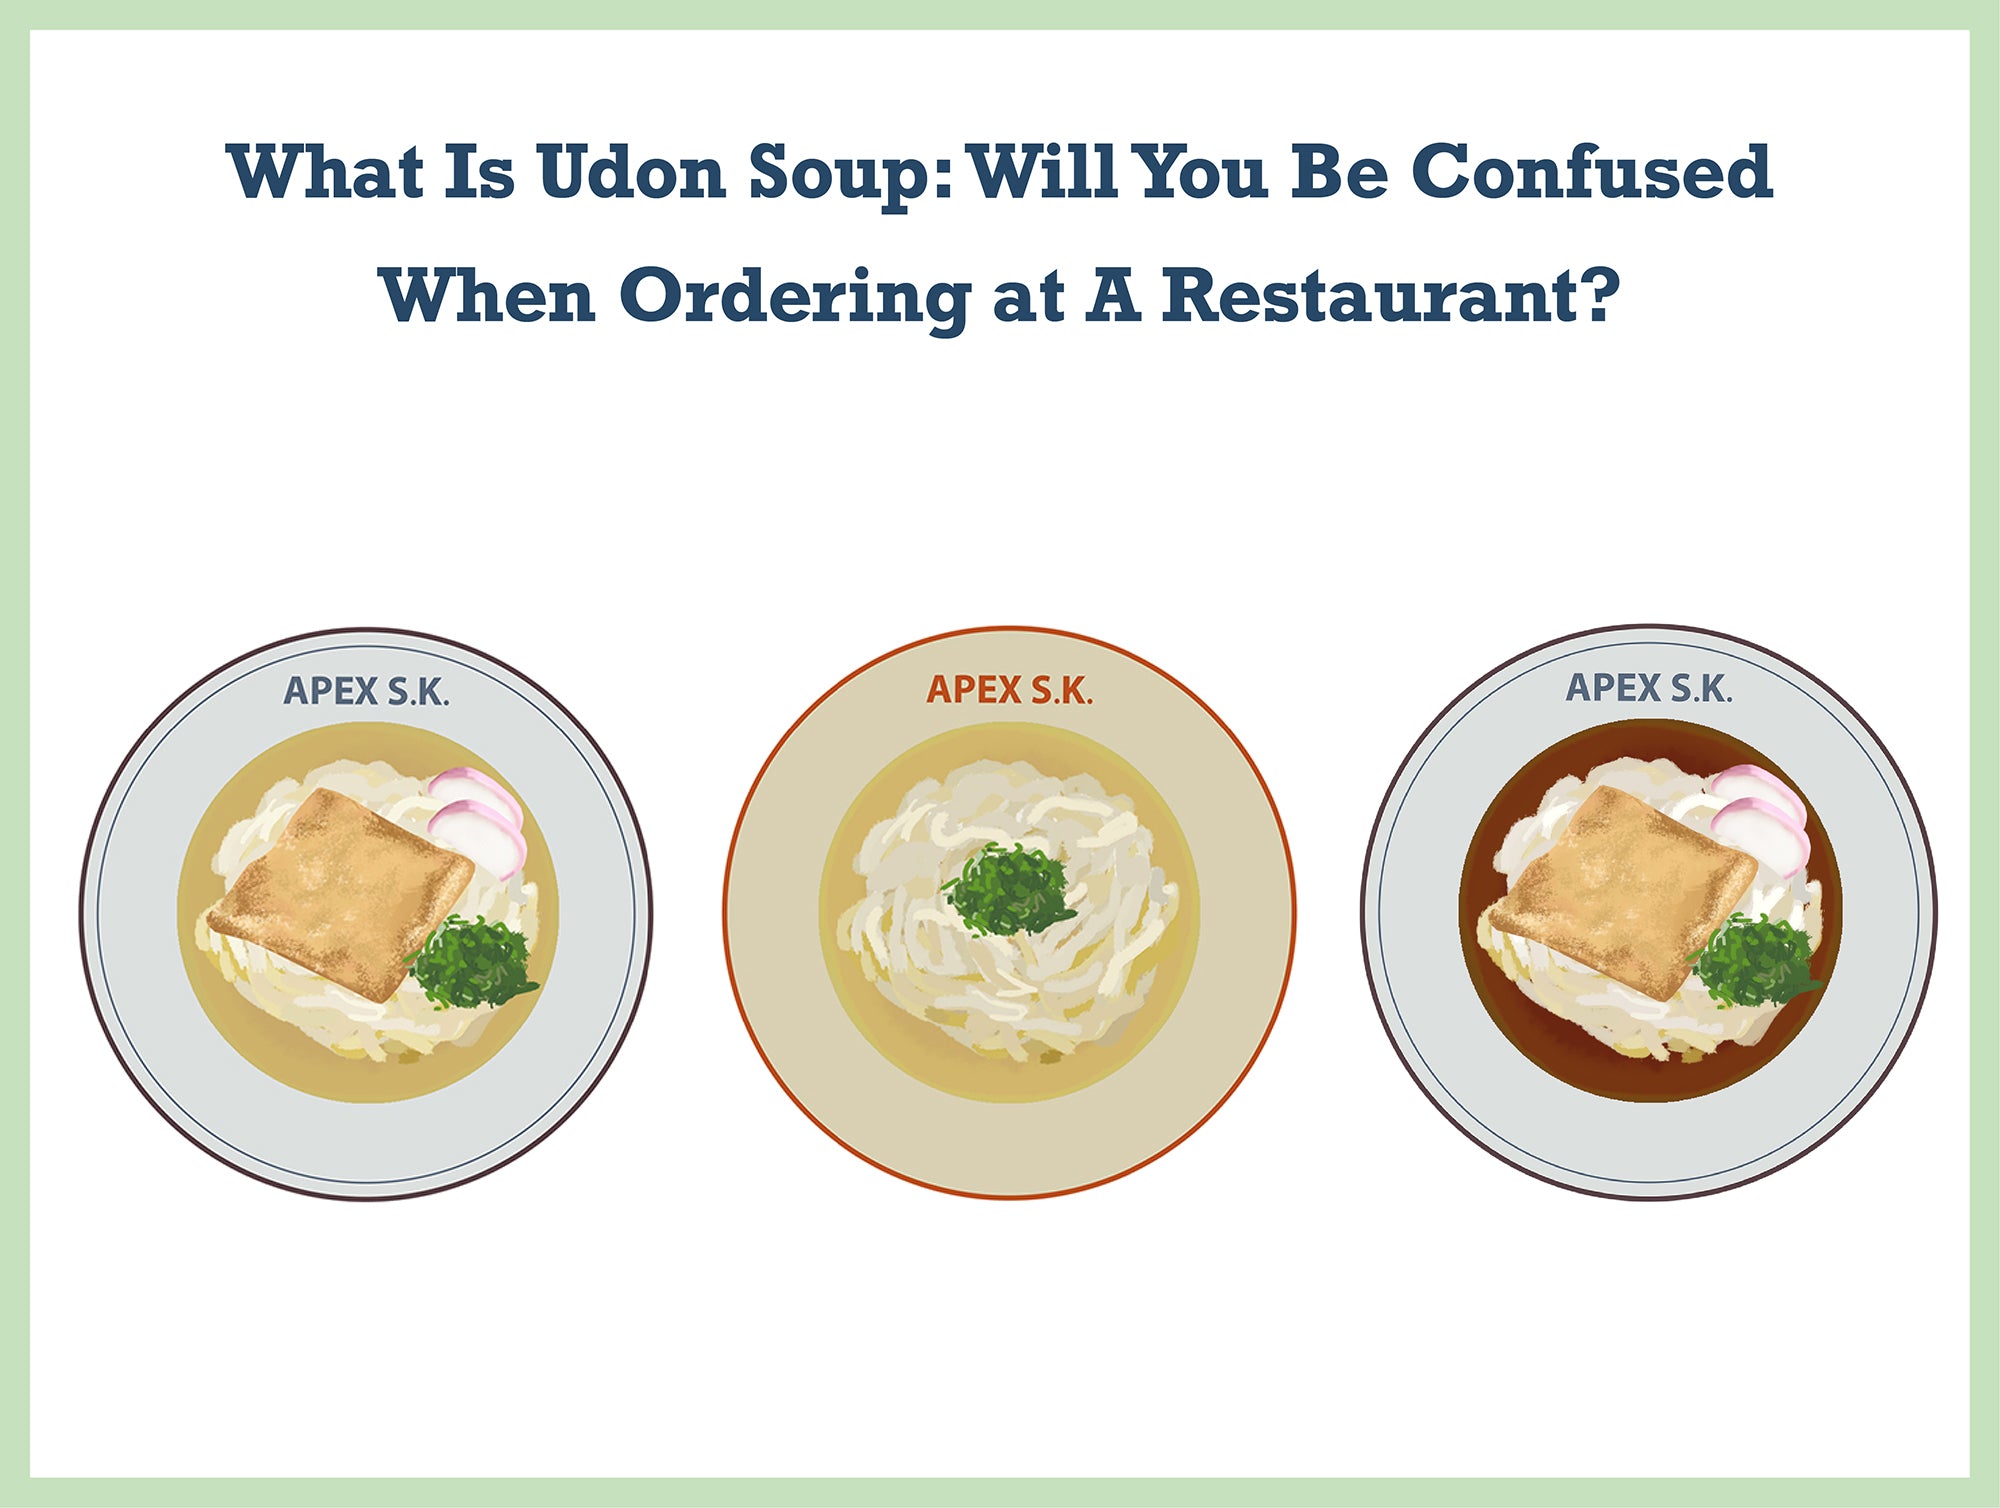 What Is Udon Soup: Will You Be Confused When Ordering at A Restaurant?